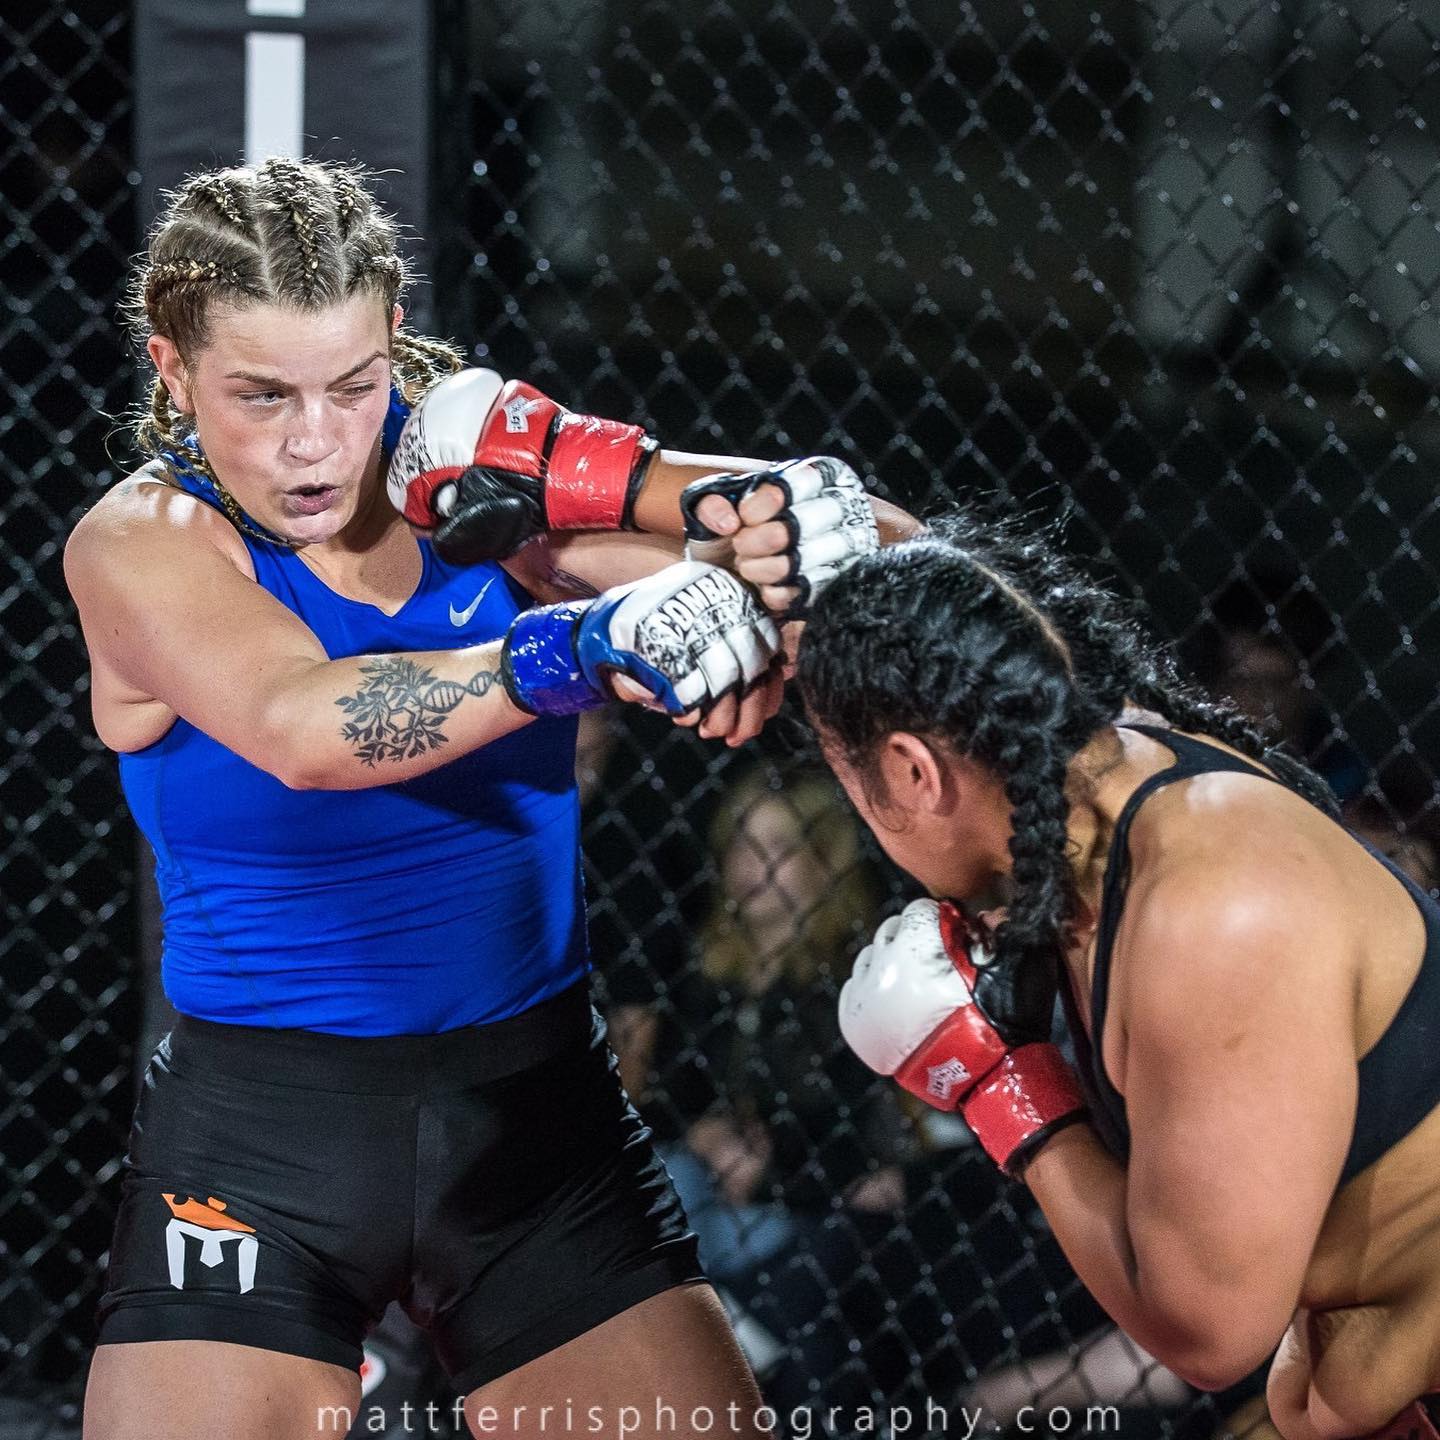 Two years ago I had my first mma fight. I’ve come a long way since then. Can’t wait for what’s next 👊🏻Shout out to @mattburn_photography for the great 📸 .
.
.
#womenofcombat #mattburnphotography #bjj #muaythai #mabjjtacoma #kickboxing #mma #takedowns #grappling #fightchicks #fightlife #wrestling #success #nevergiveup #fight  #hardwork #wmma #seattle #washington